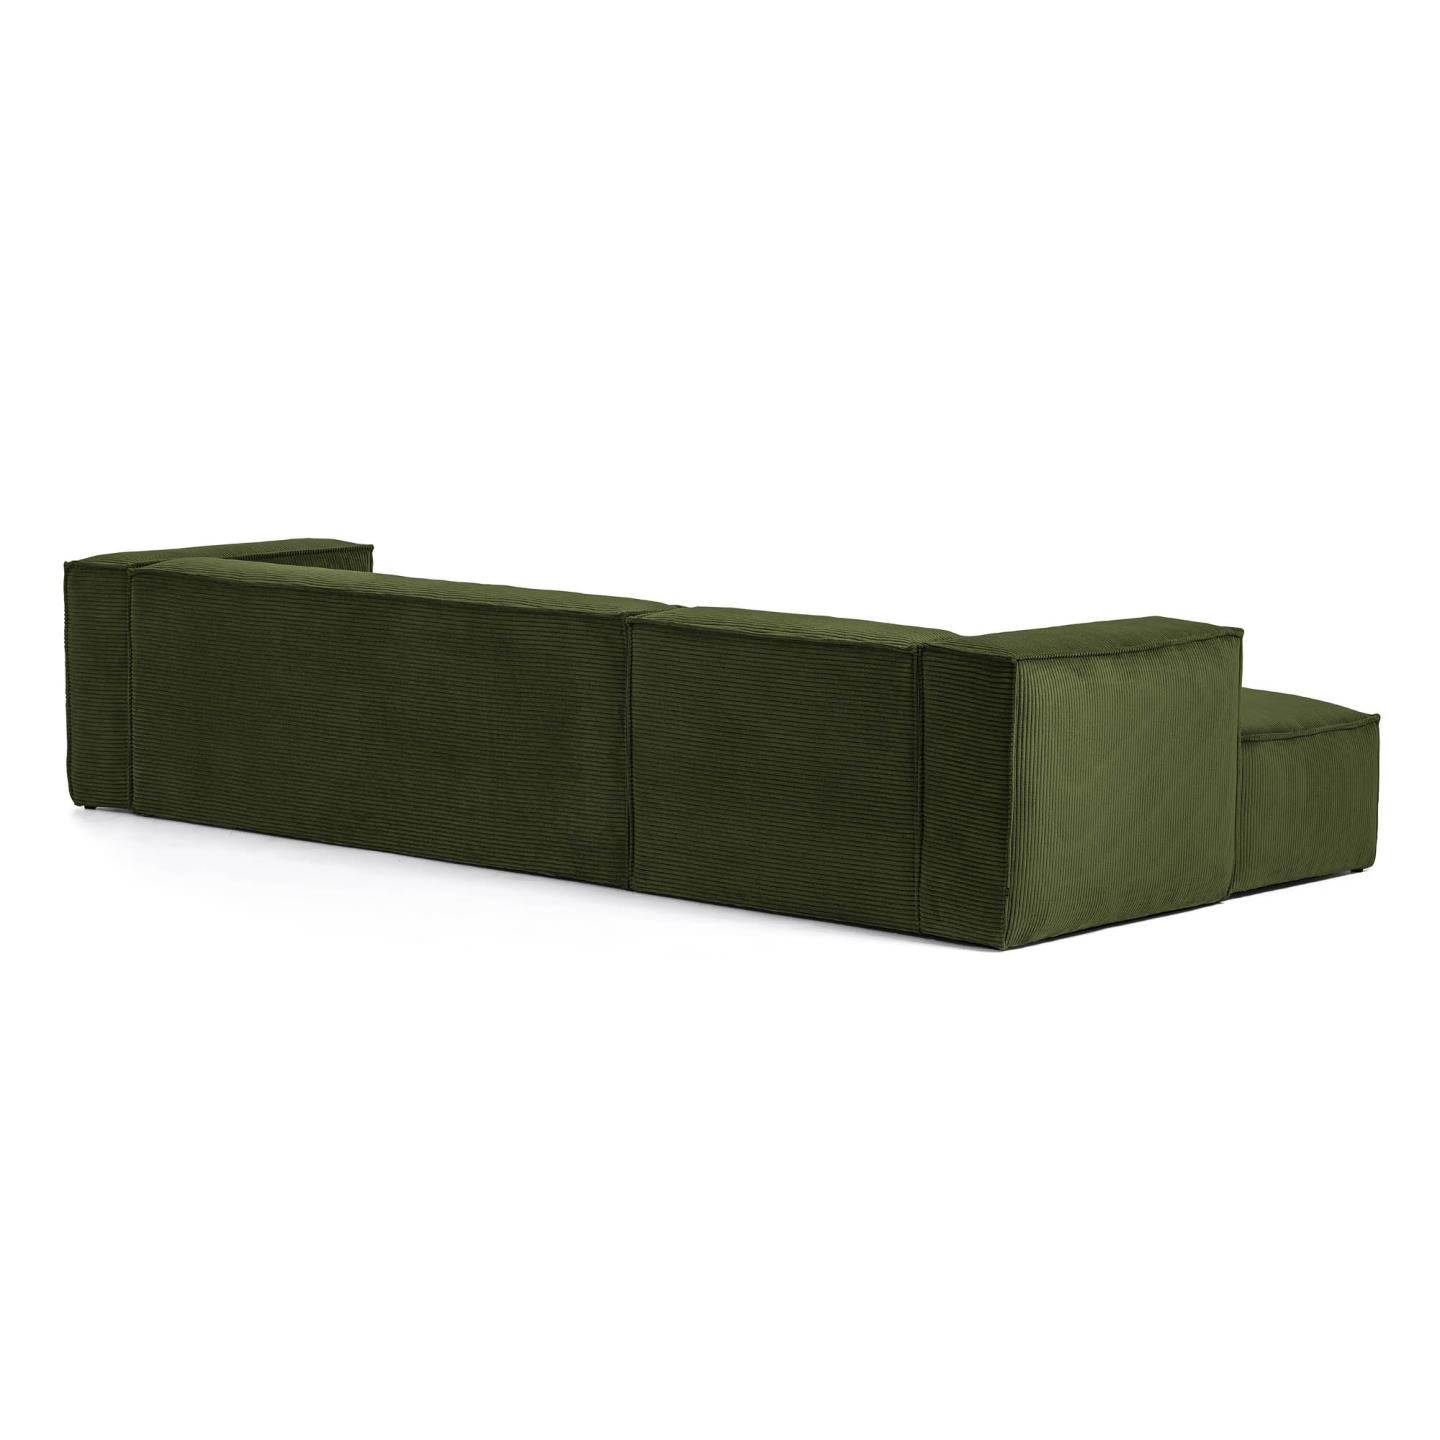 Blok 4 seater sofa with left side chaise longue in green wide seam corduroy, 330 cm